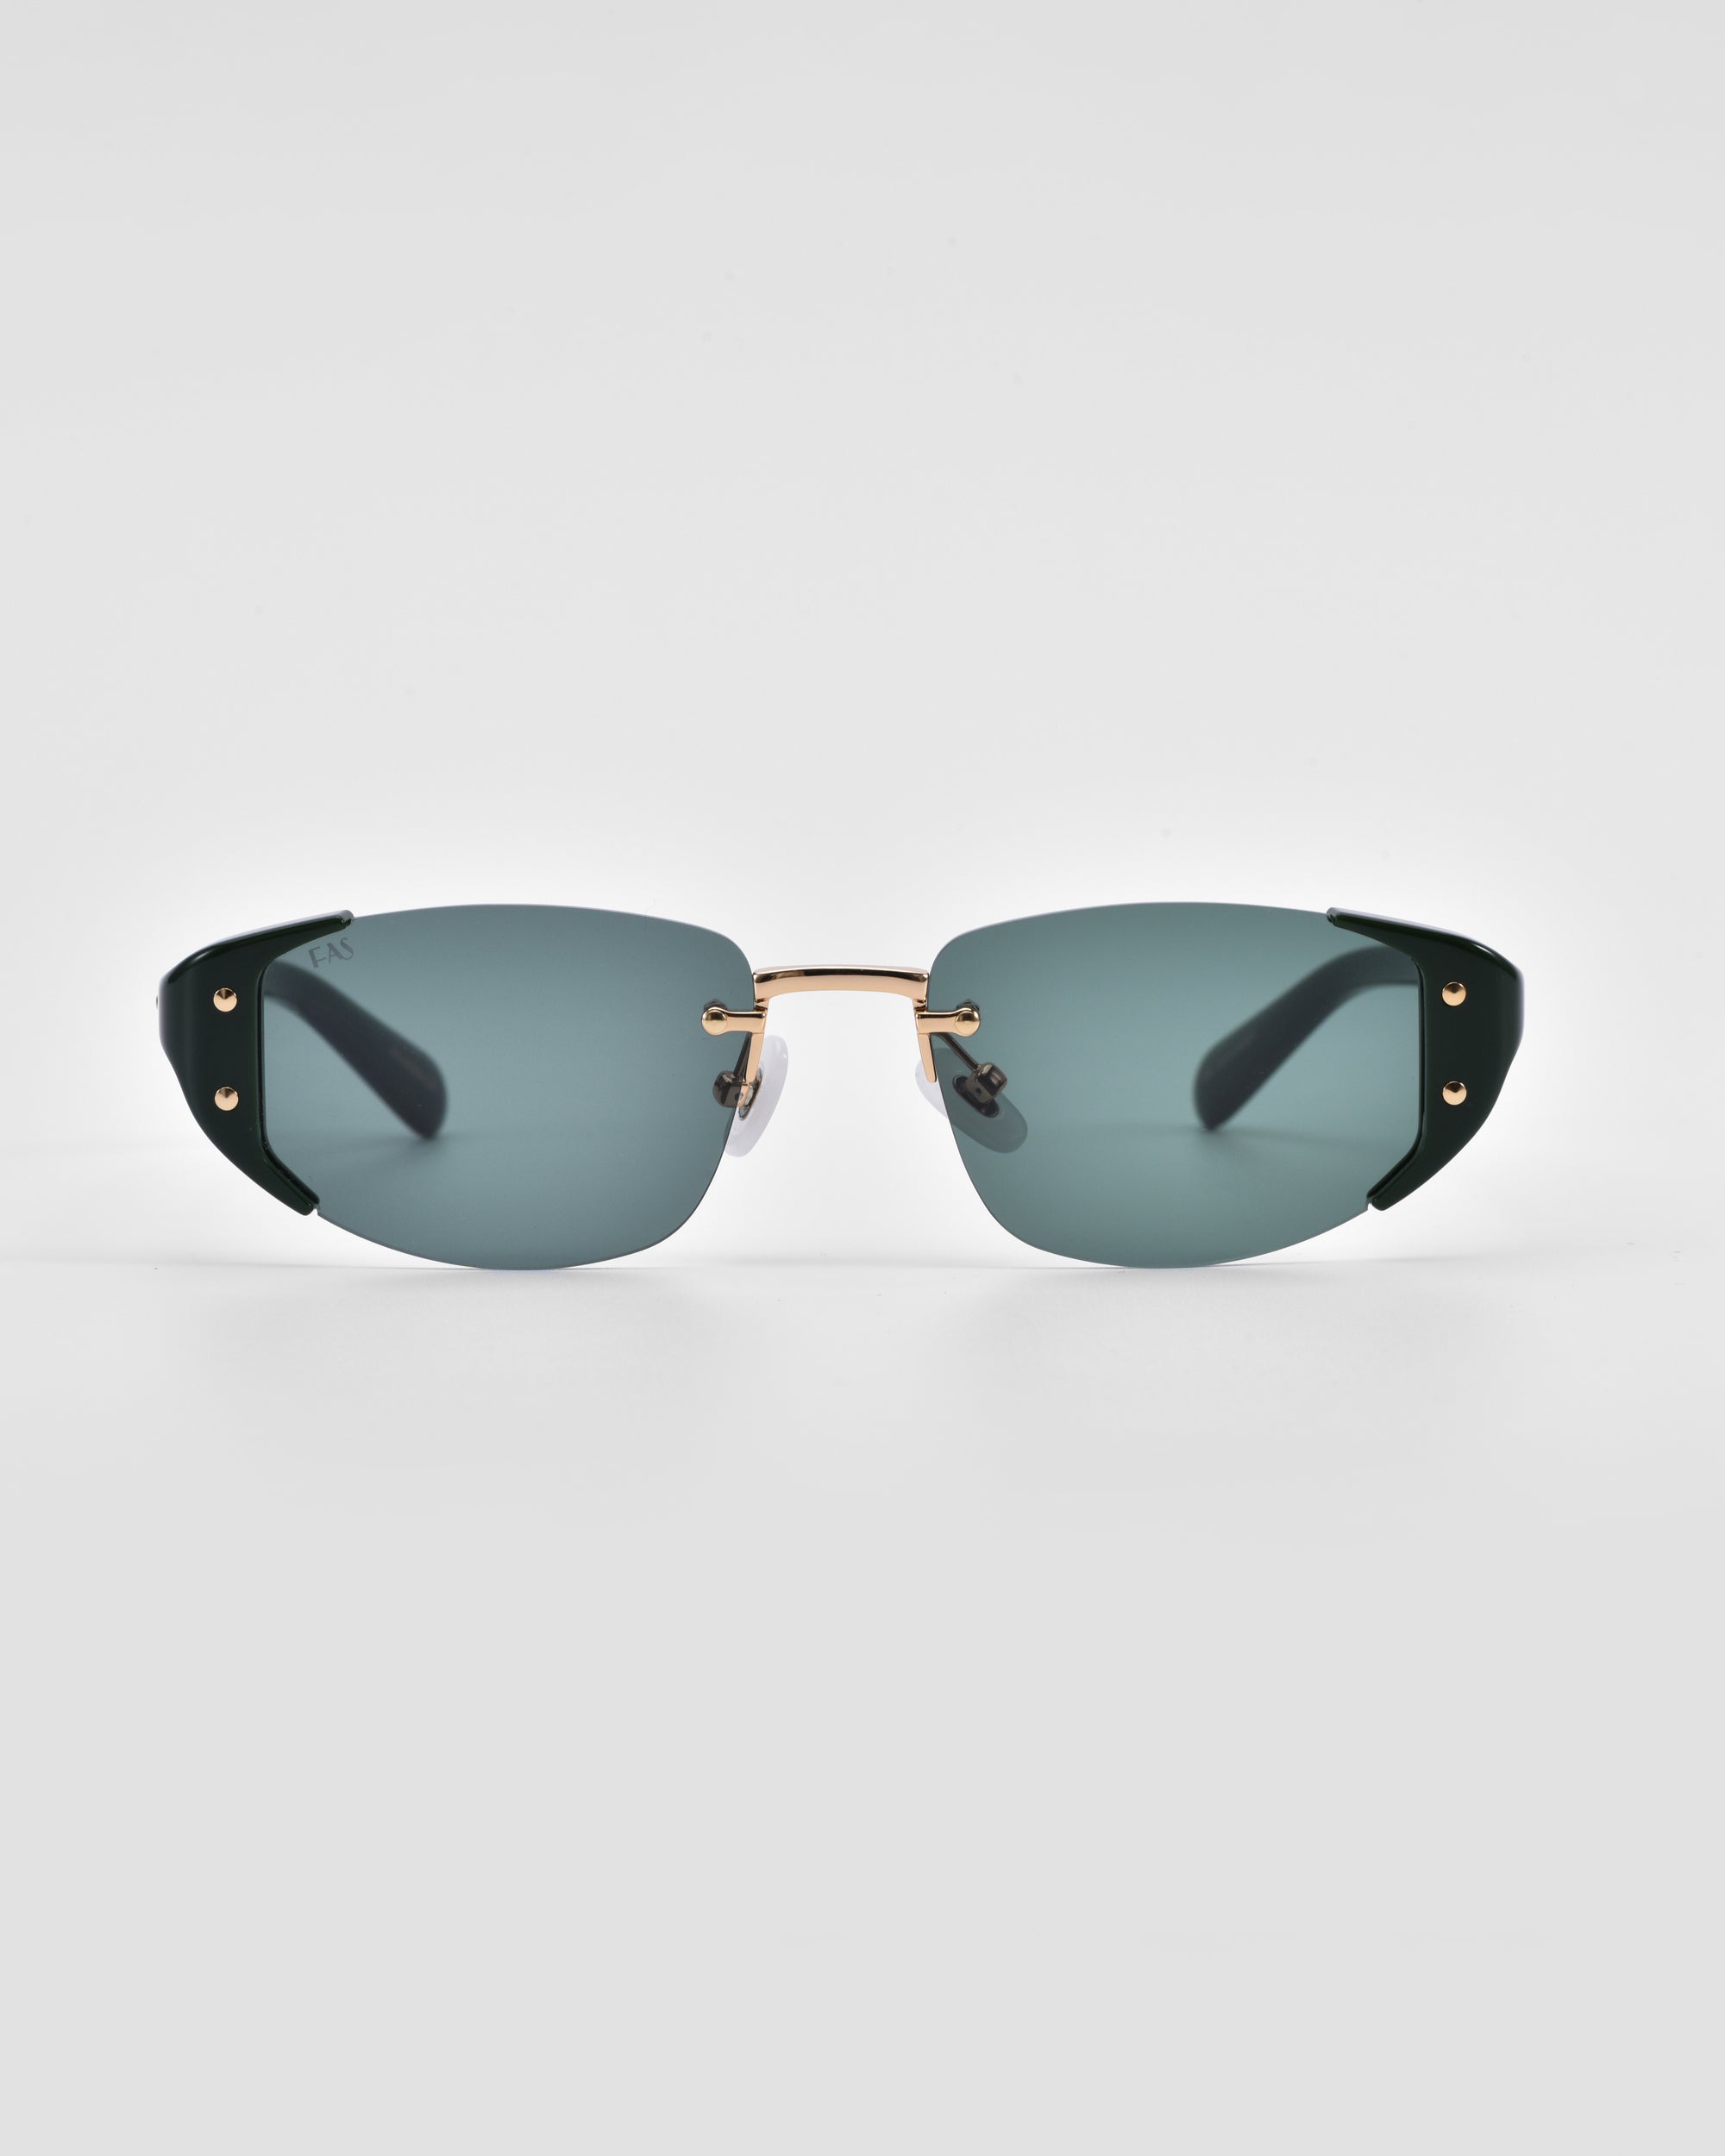 A pair of sleek, modern For Art's Sake® Harbour sunglasses with green-tinted lenses and a minimalistic design. The frames are thin and predominantly gold with black accents on the temples, complemented by jade-stone nose pads. The background is plain white, emphasizing the stylish eyewear.